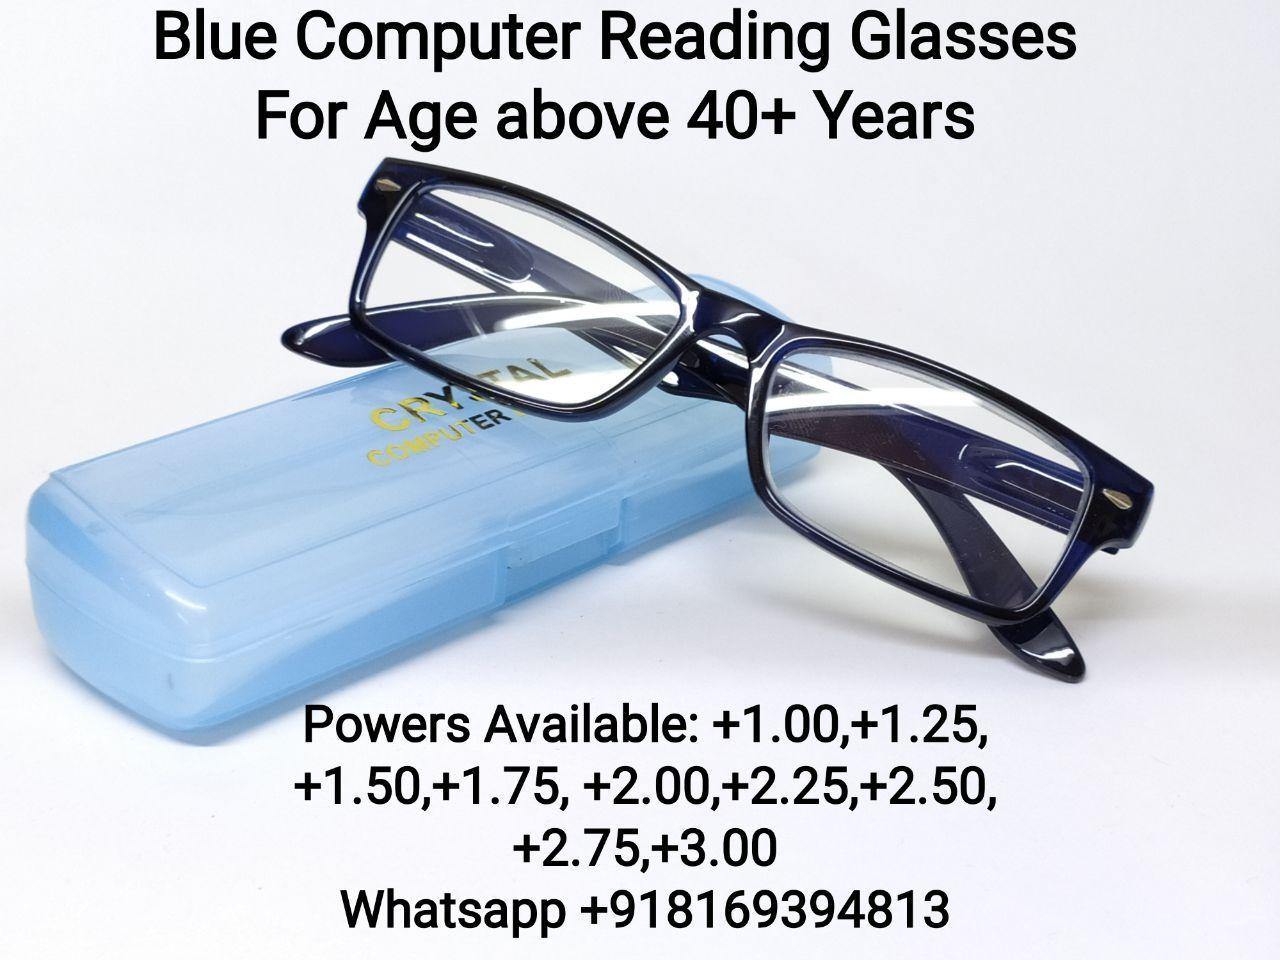 Blue Computer Reading Glasses for Men and Women